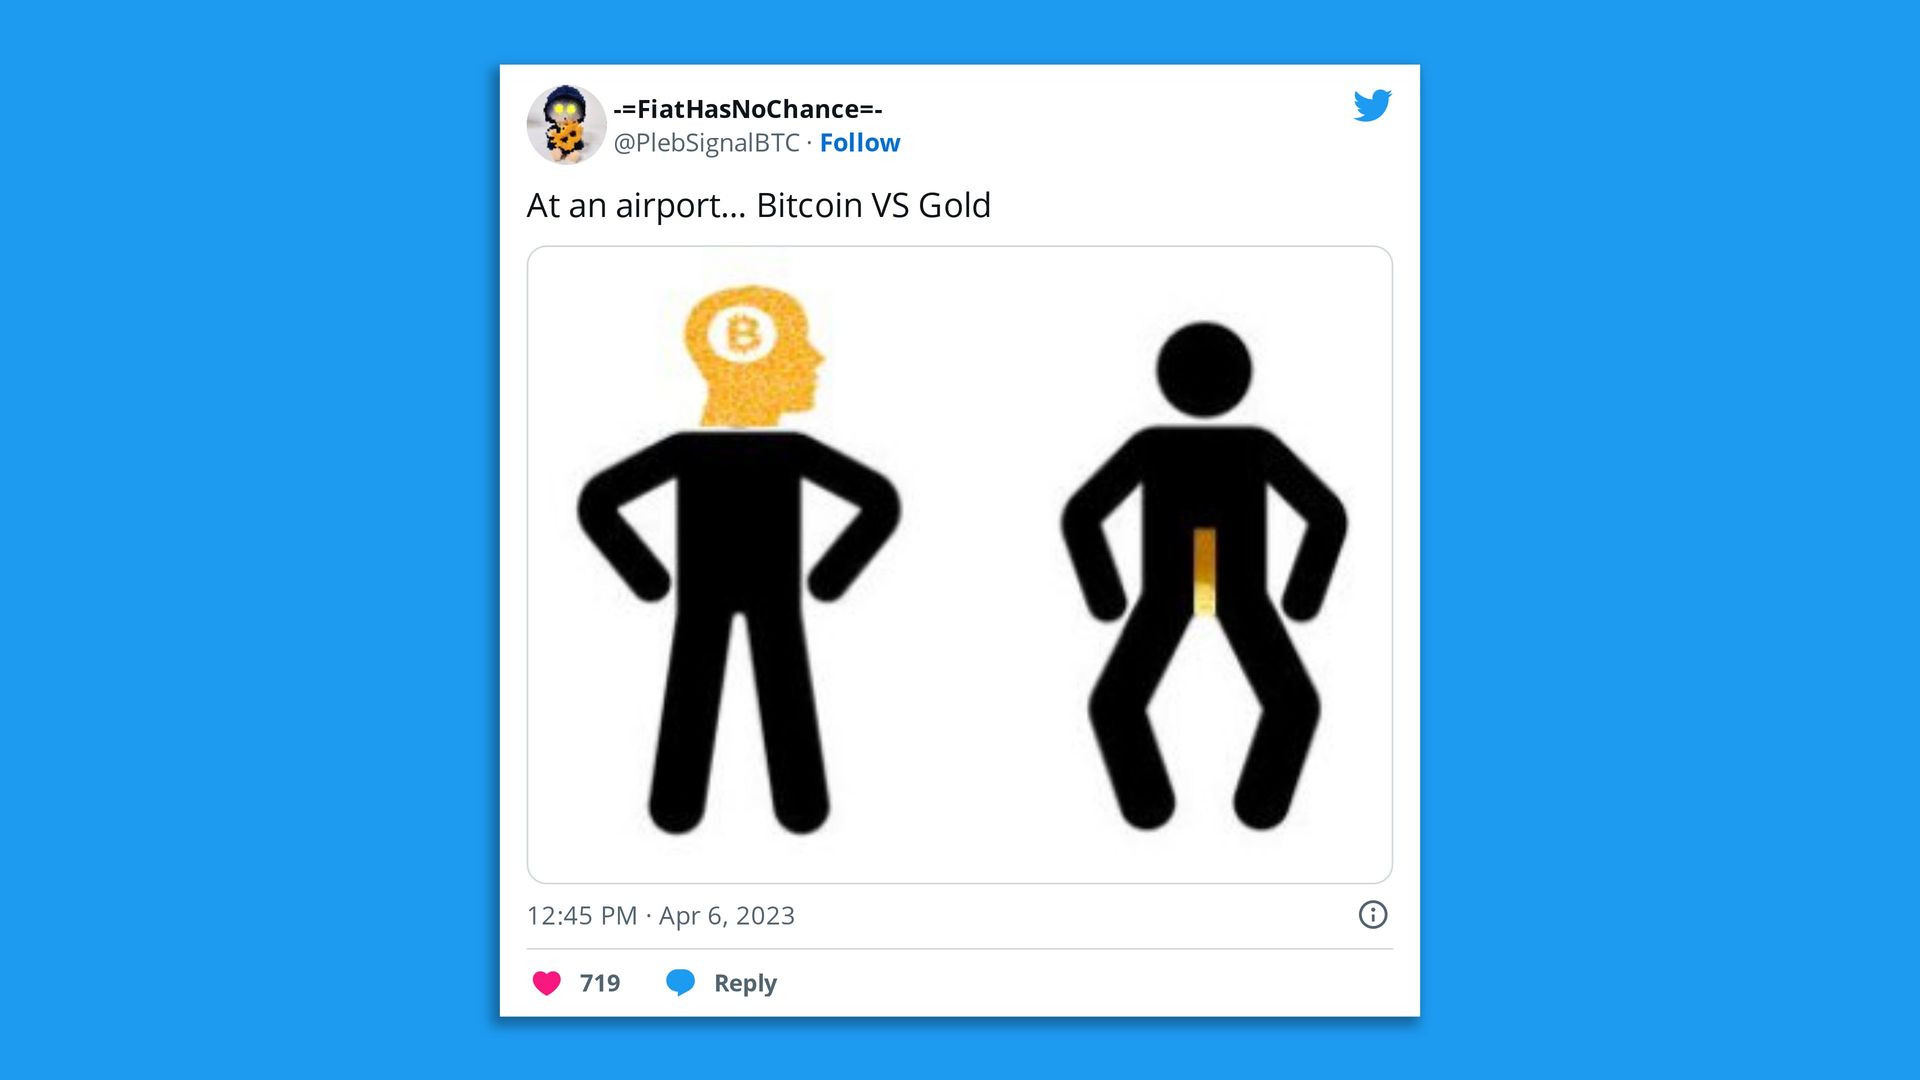 Images of people icons, on the left, a man with bitcoin in his head, on the right, a man with gold on his person